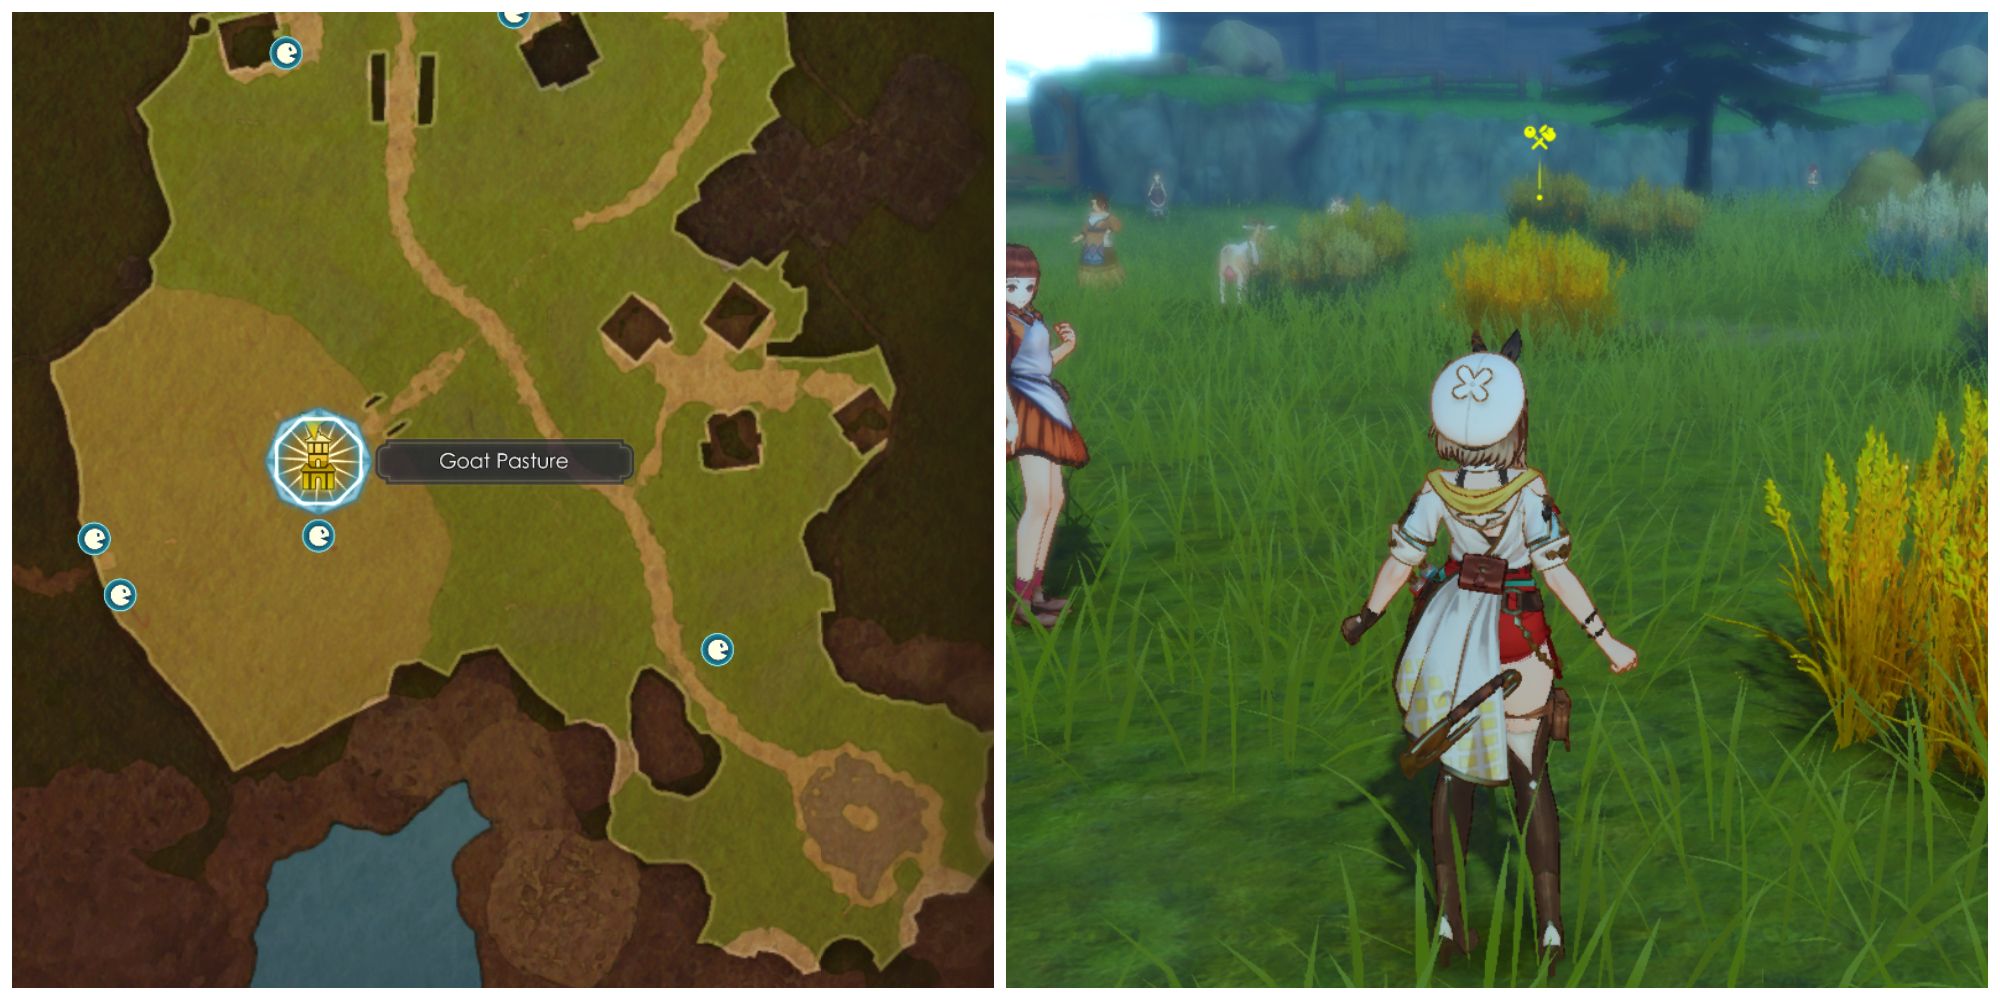 Image breakdown of the Goat Pasture landmark on the map and rare ingredients in Goat Pasture in Atelier Ryza 3.